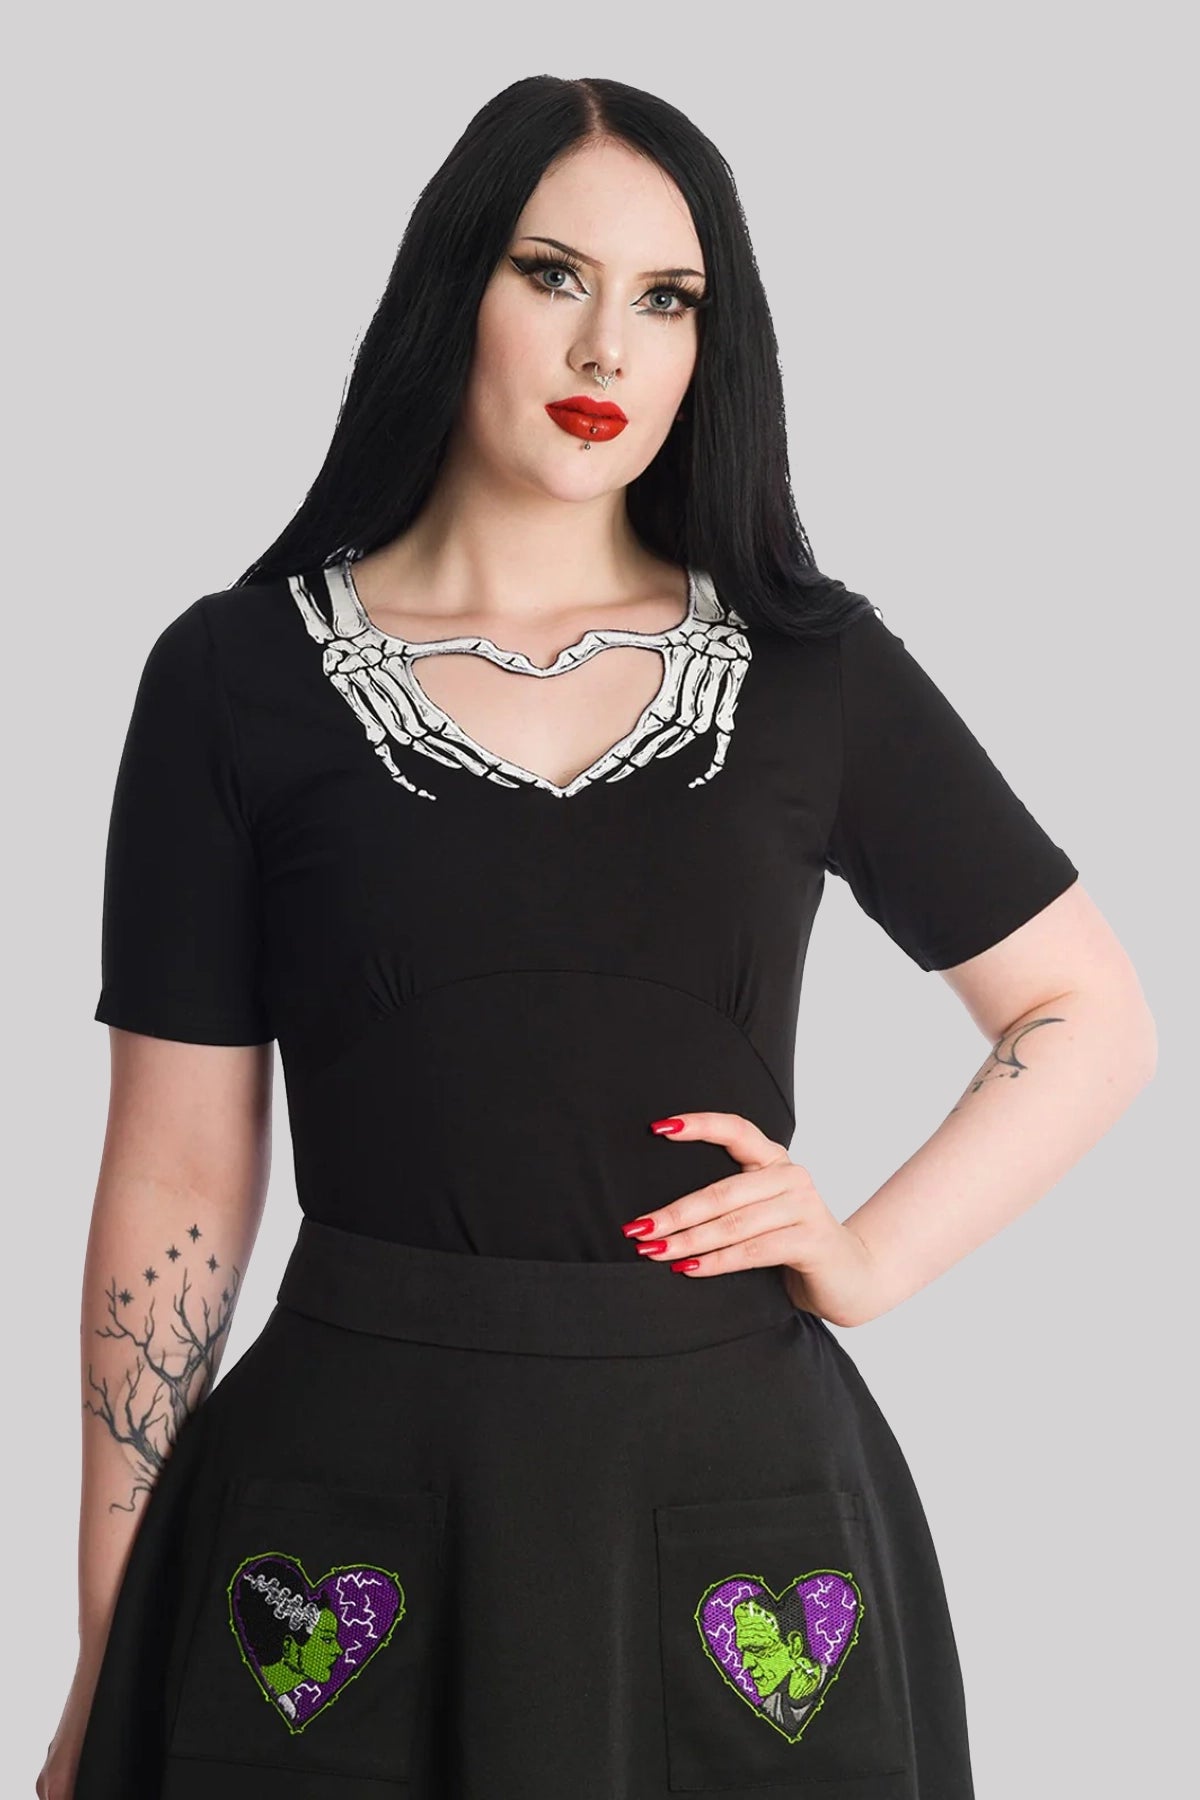 Banned Skeleton Heart T-shirt Cut-Out Underbust Gothic Alternative Keyhole Top